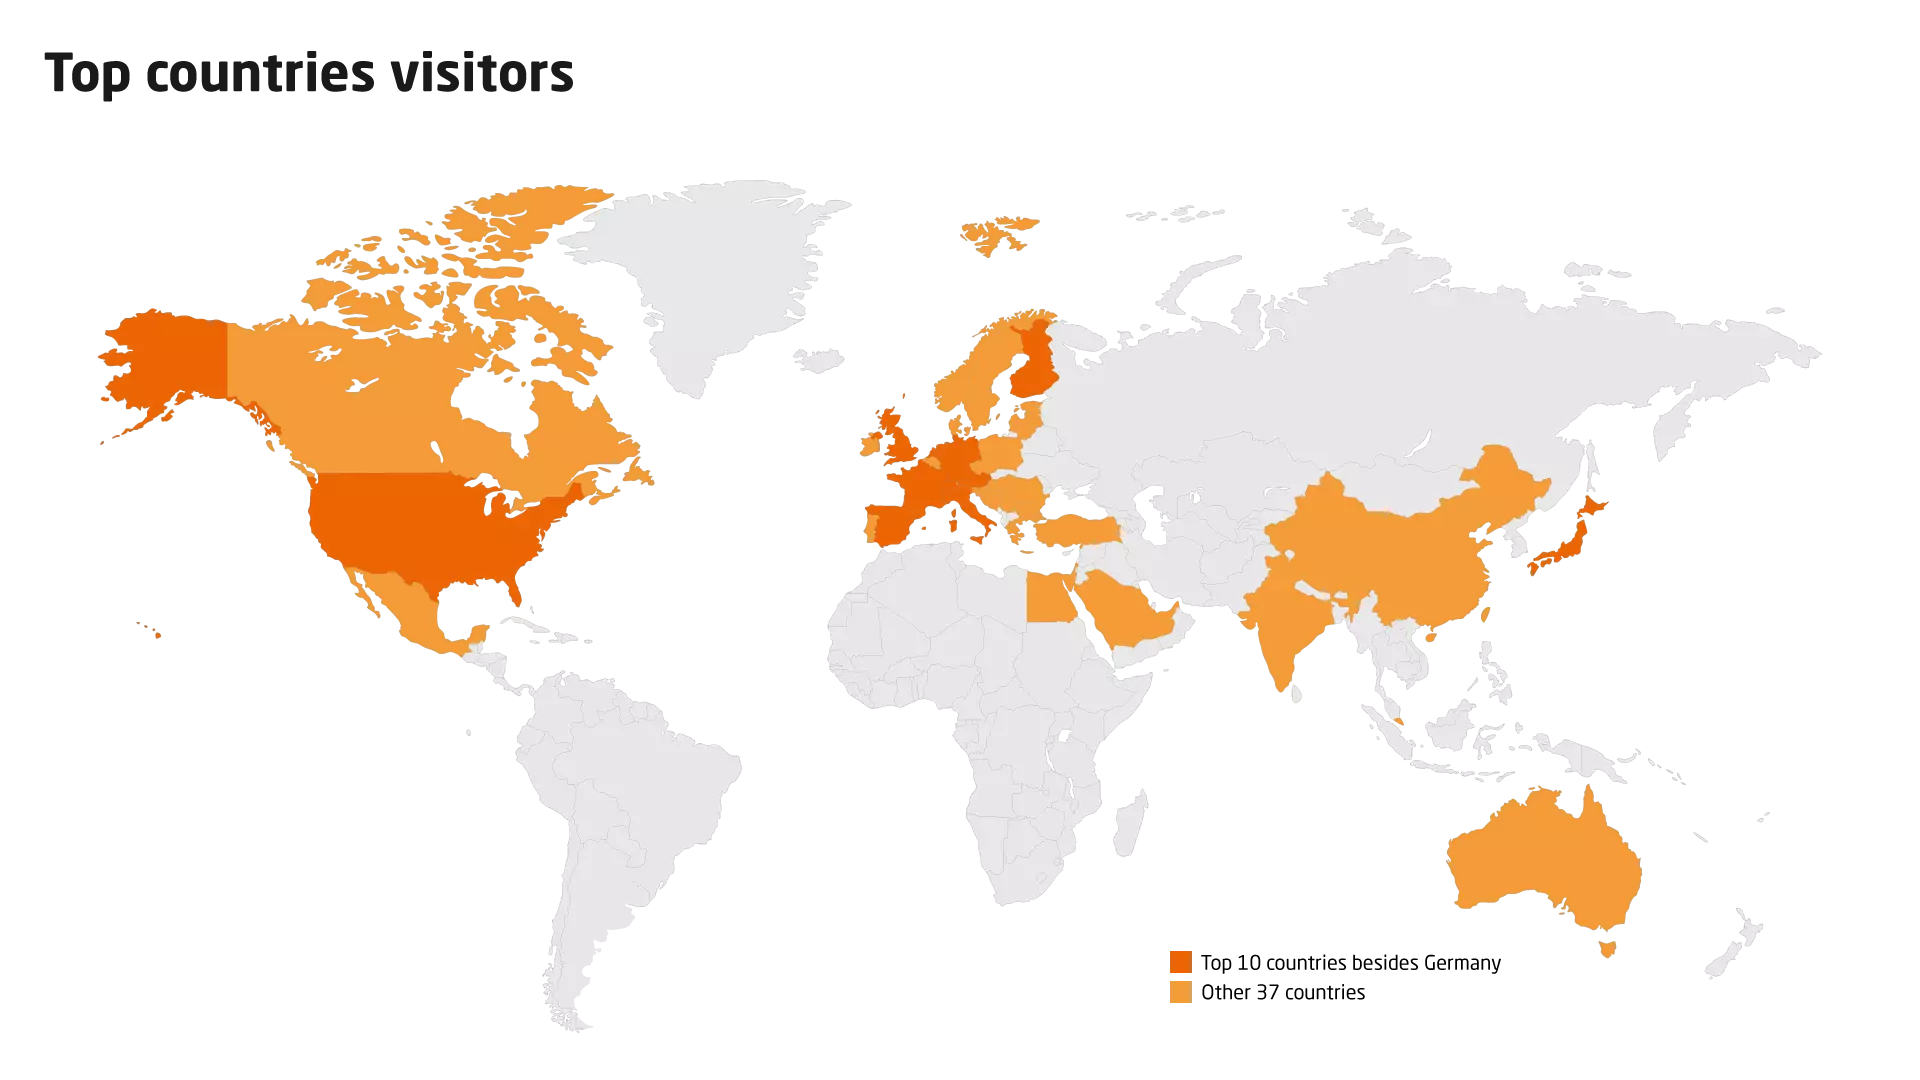 World map showing the countries from which LOPEC visitors come